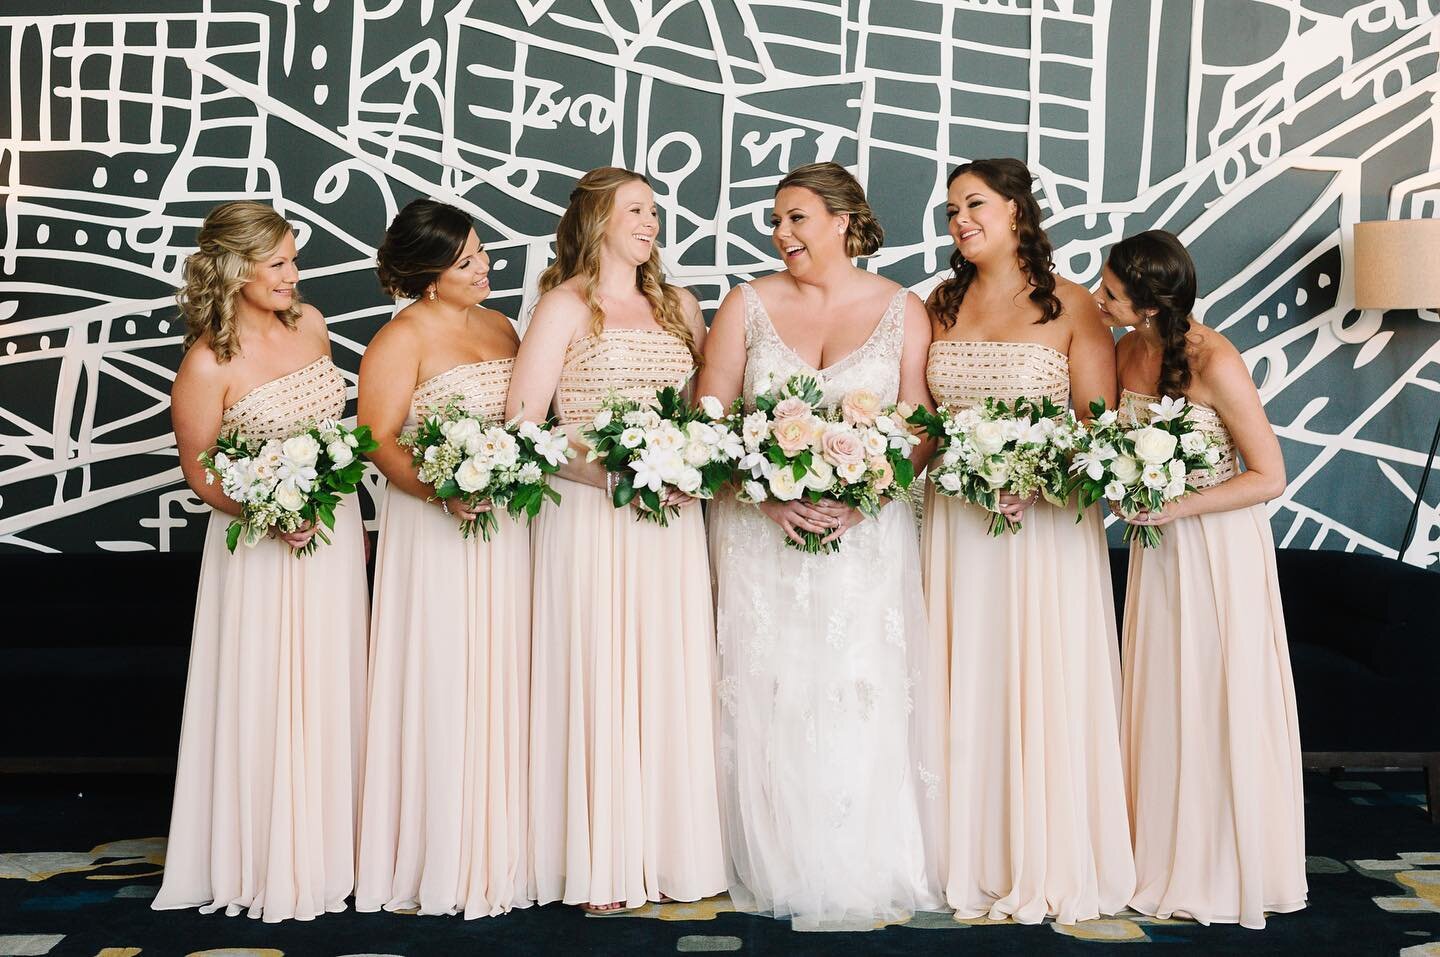 These beautiful bridesmaids aren't just friends; they're the pillars of support, the partners in mischief, and the keepers of cherished memories. ✨🥂 #BrideTribe #SquadGoals #weddingcoordinator #torontoweddings